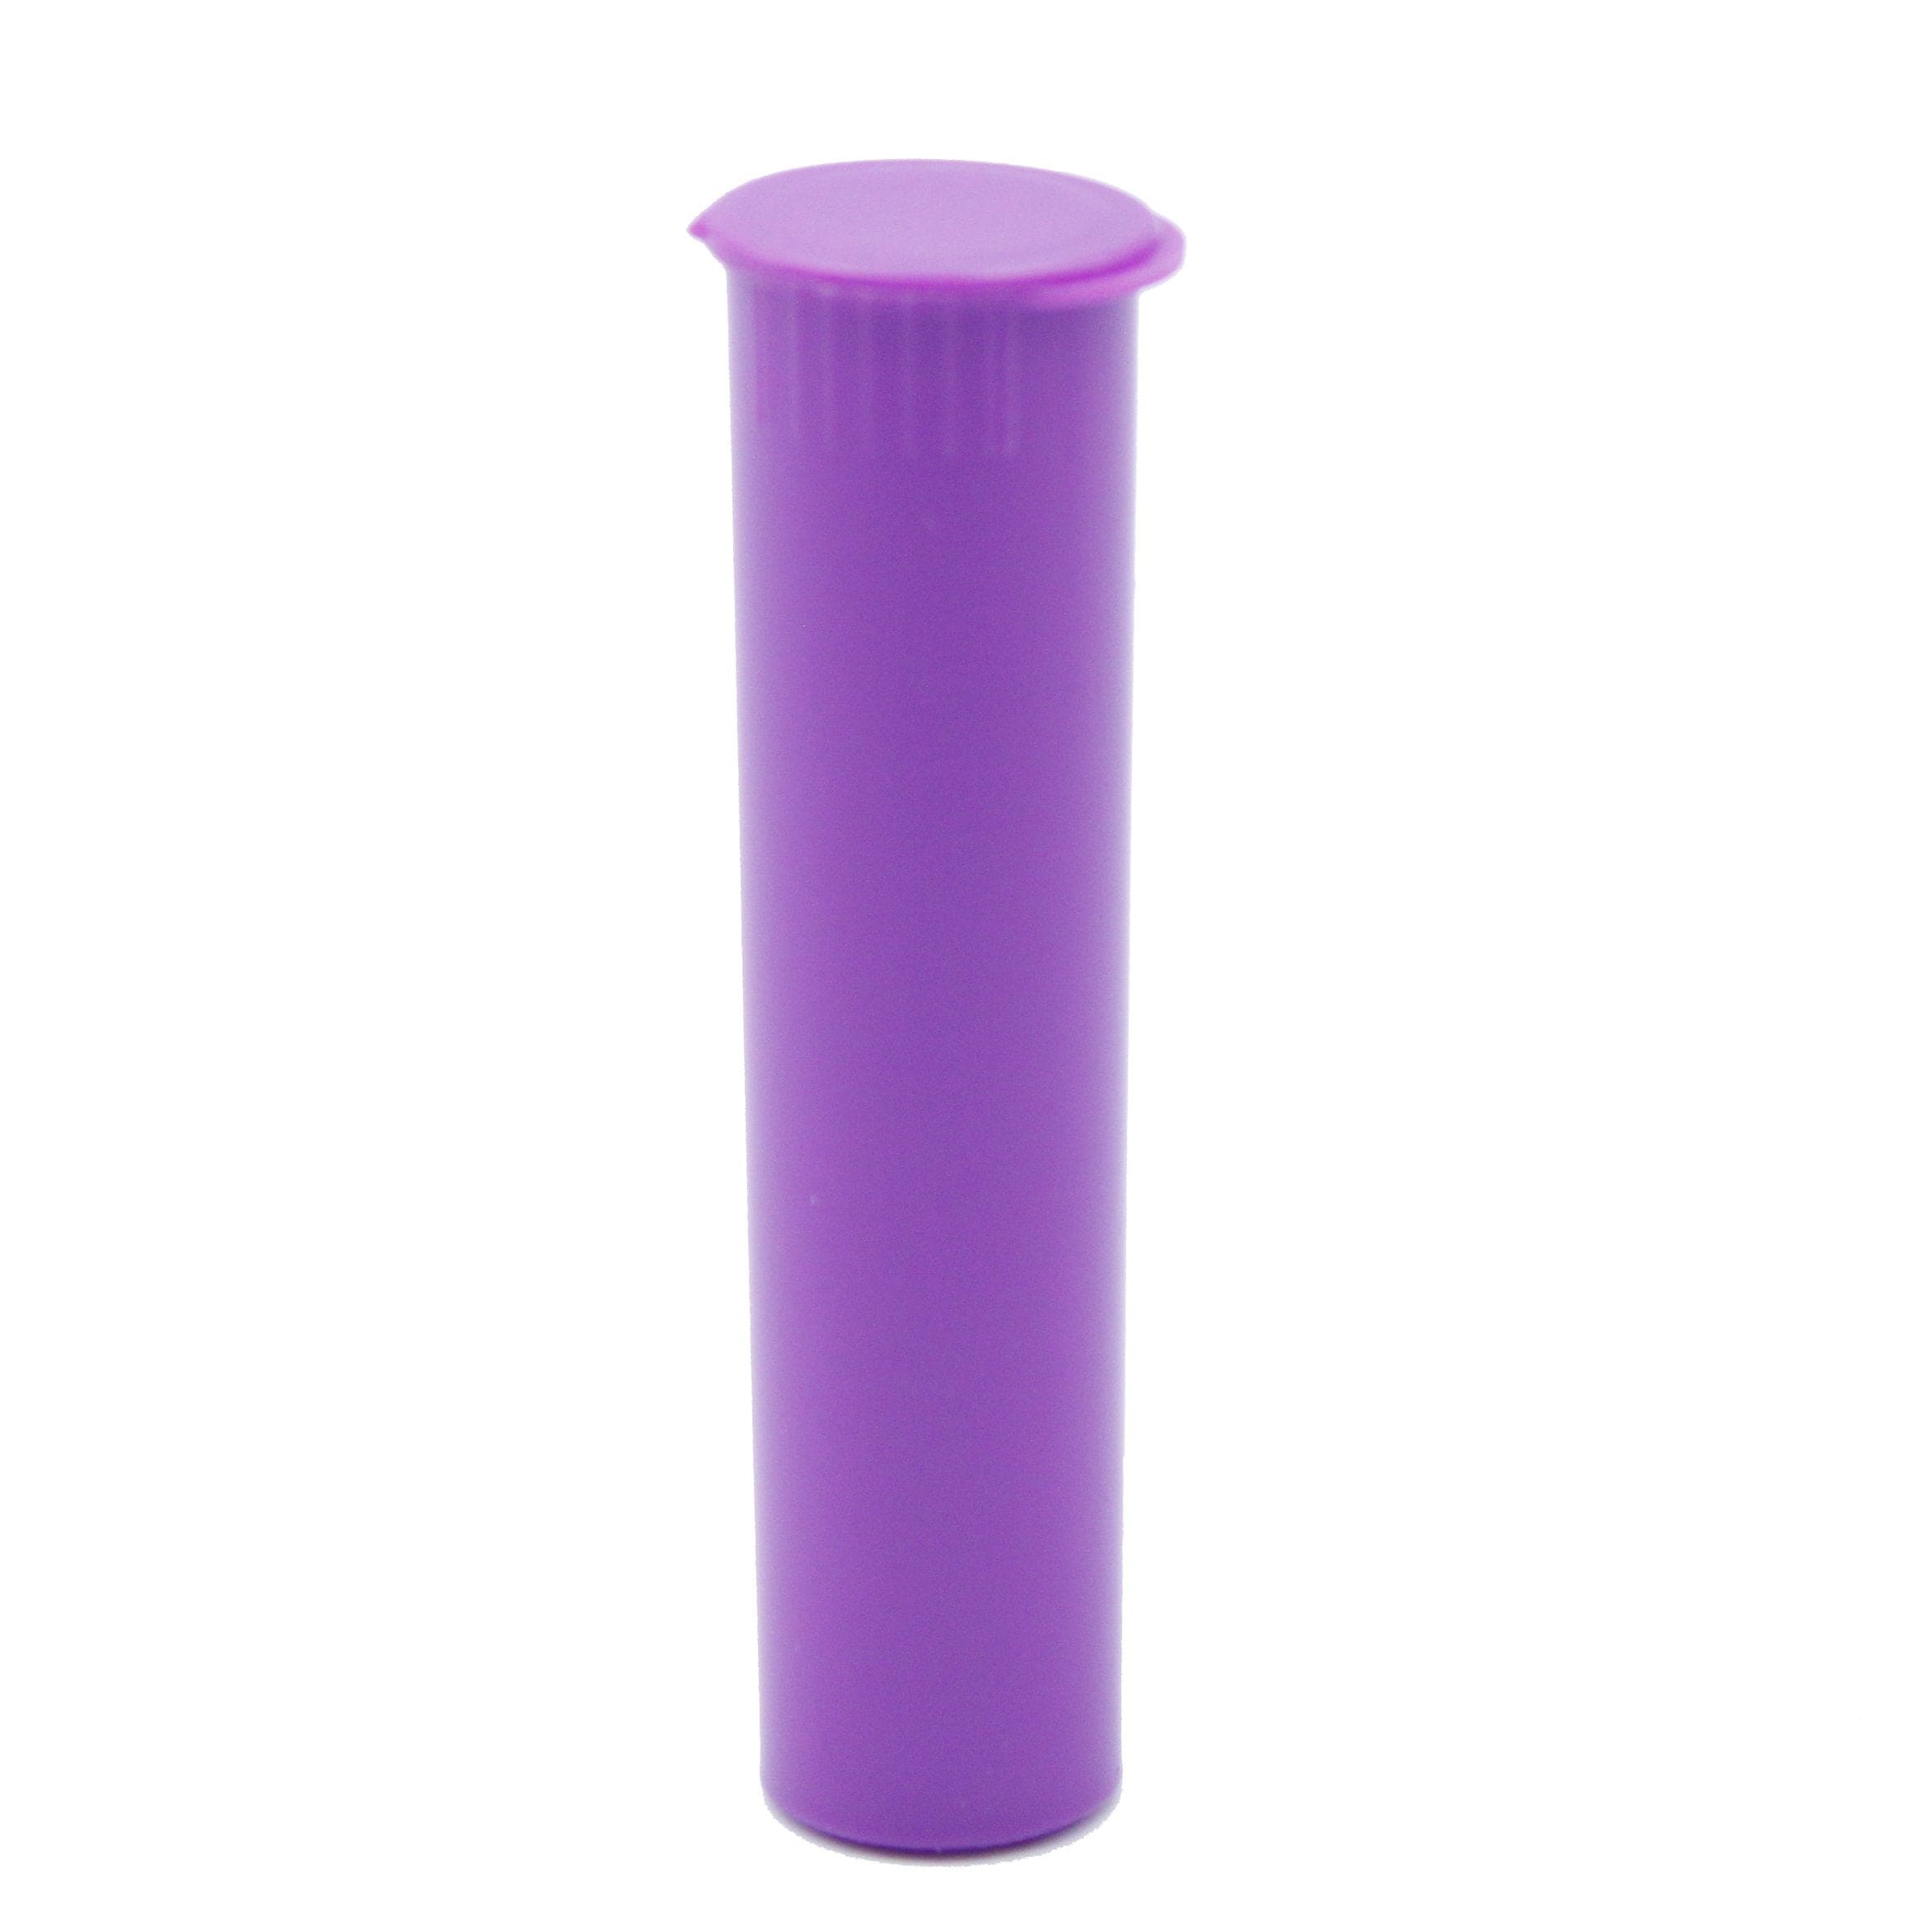 Clearance Squeeze Top Child-Resistant Pre-Roll Tube | 78 mm Purple / Box of 1000 (Bulk Pricing)